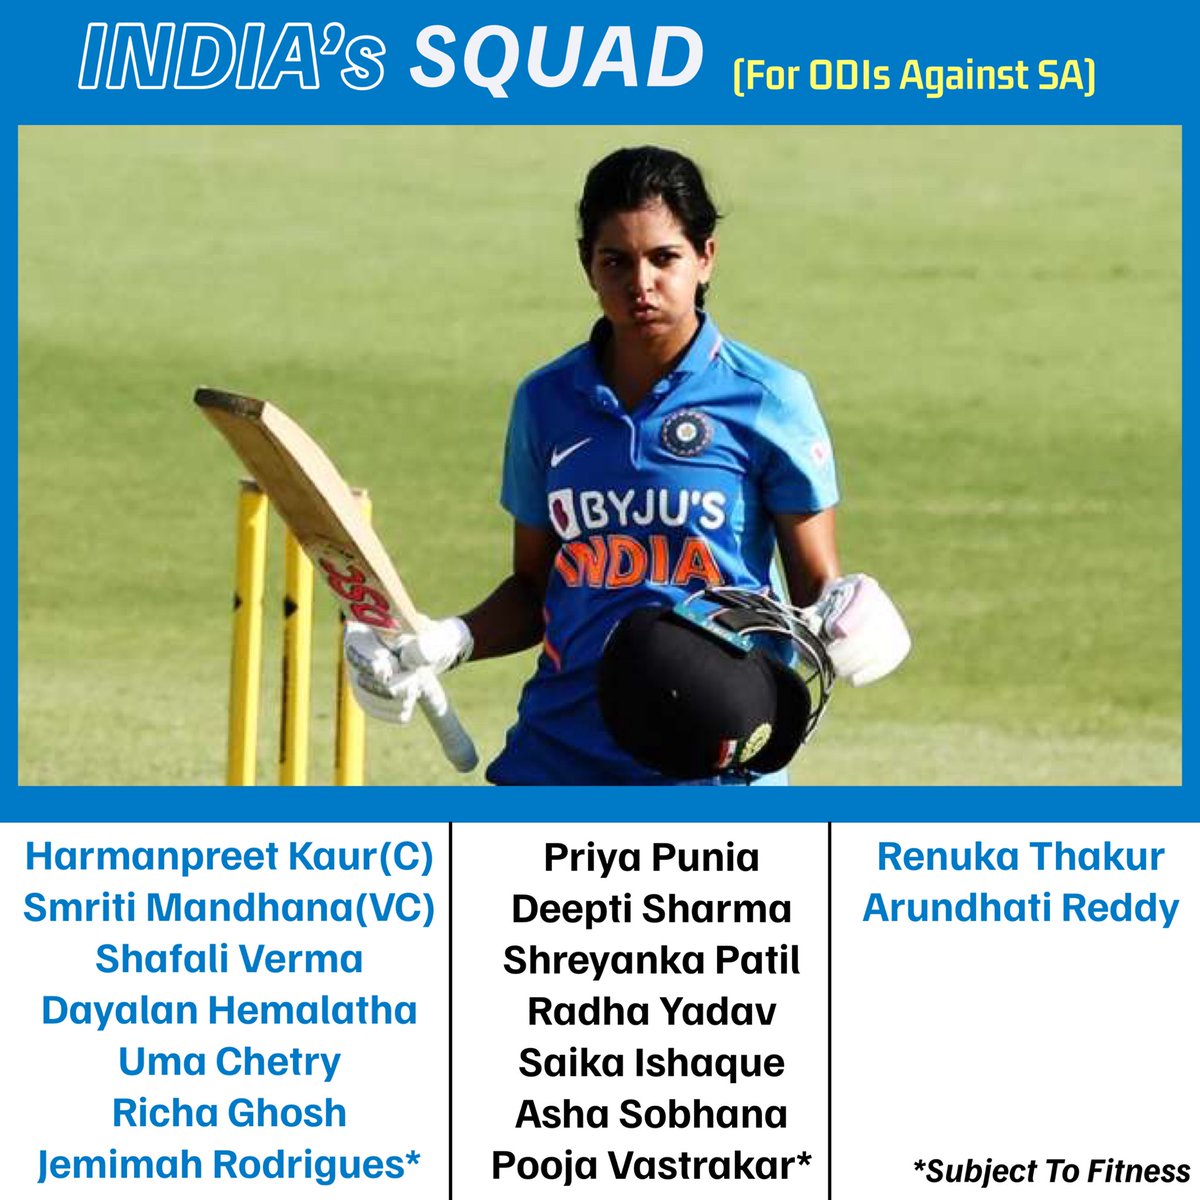 ➡️ Priya Punia and Arundhati Reddy returns to India’s Squad for the ODI series against SA!

➡️ Yastika Bhatia and Titas Sadhu miss out due to injuries!
🧢 Maiden Call-up for Asha Sobhana!

@BCCIWomen #INDvSA #CricketTwitter #IndianCricketTeam